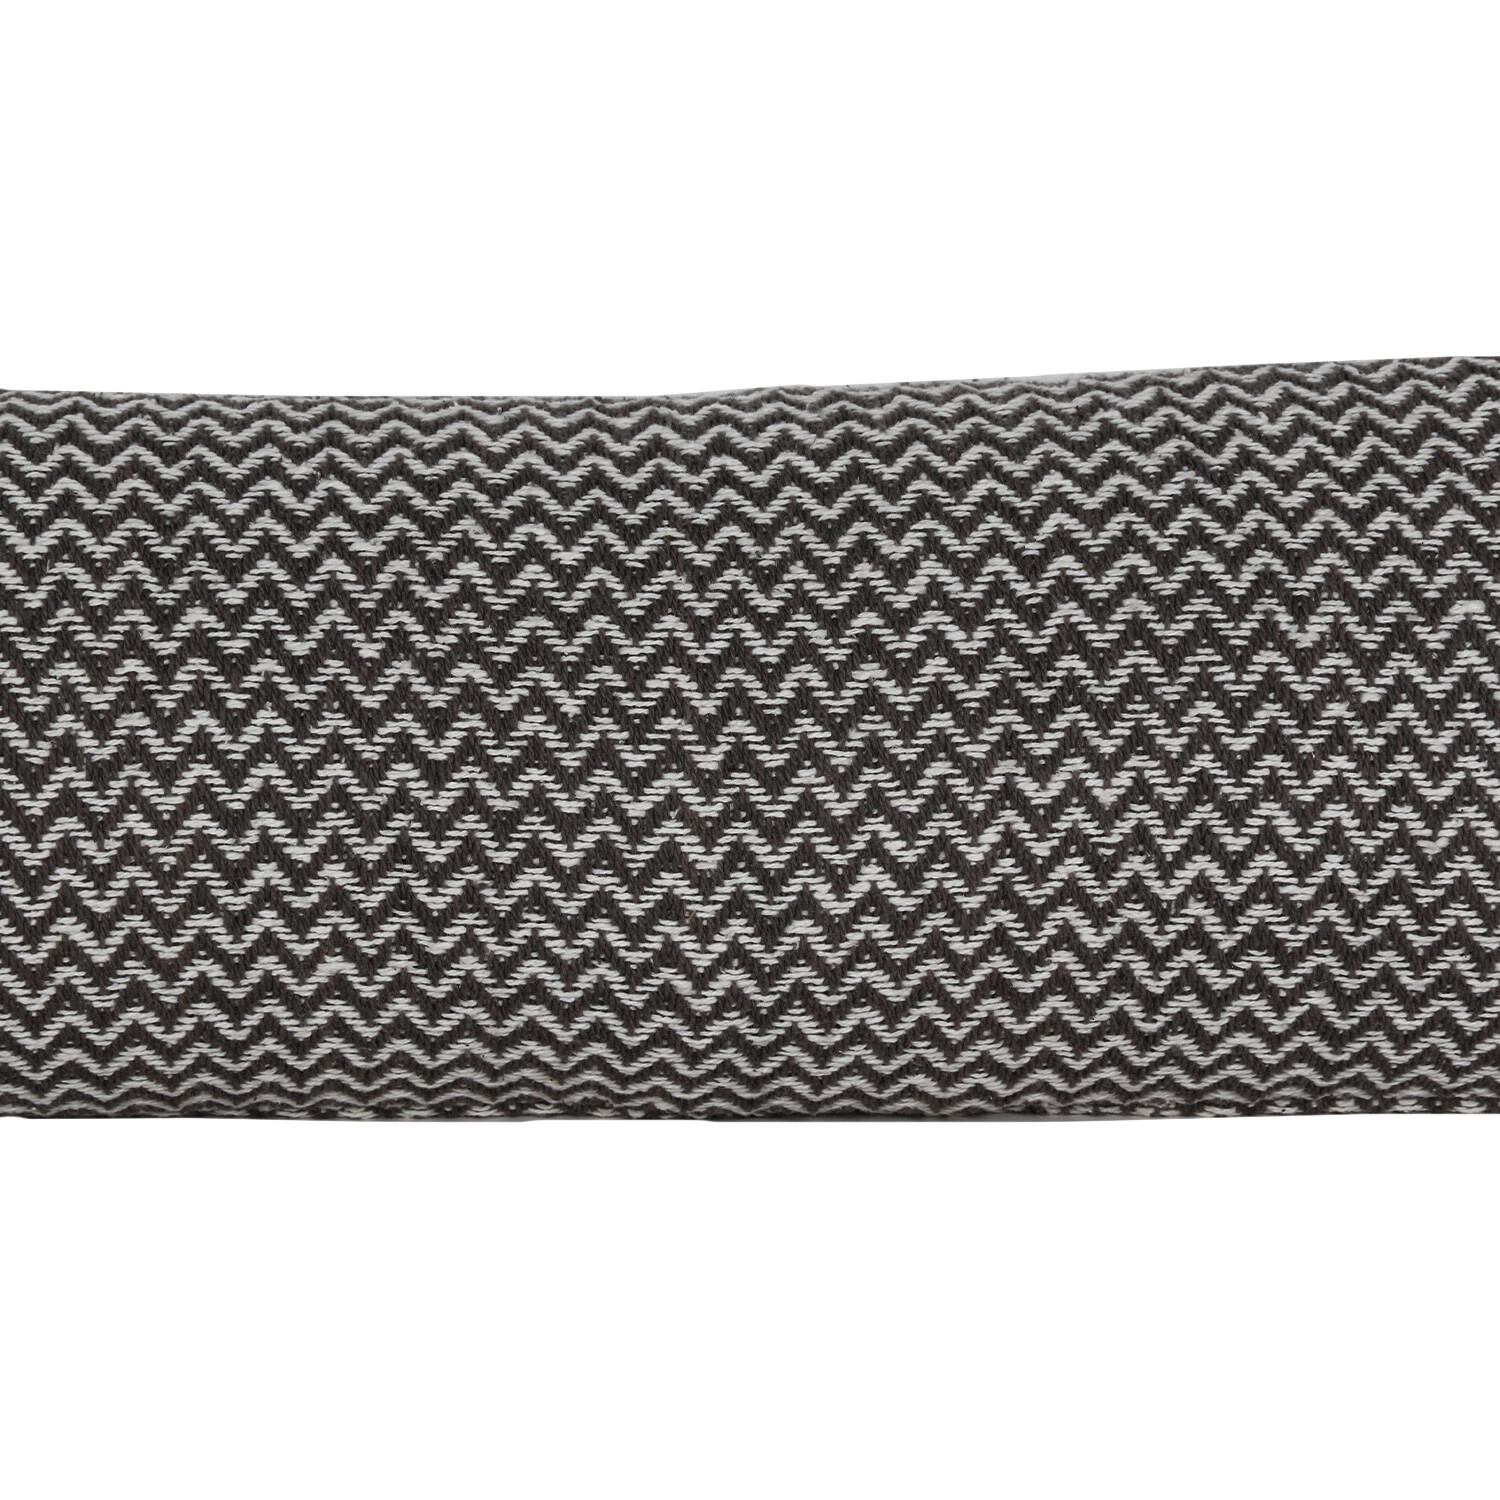 Grey Chevron Draught Excluder Image 2